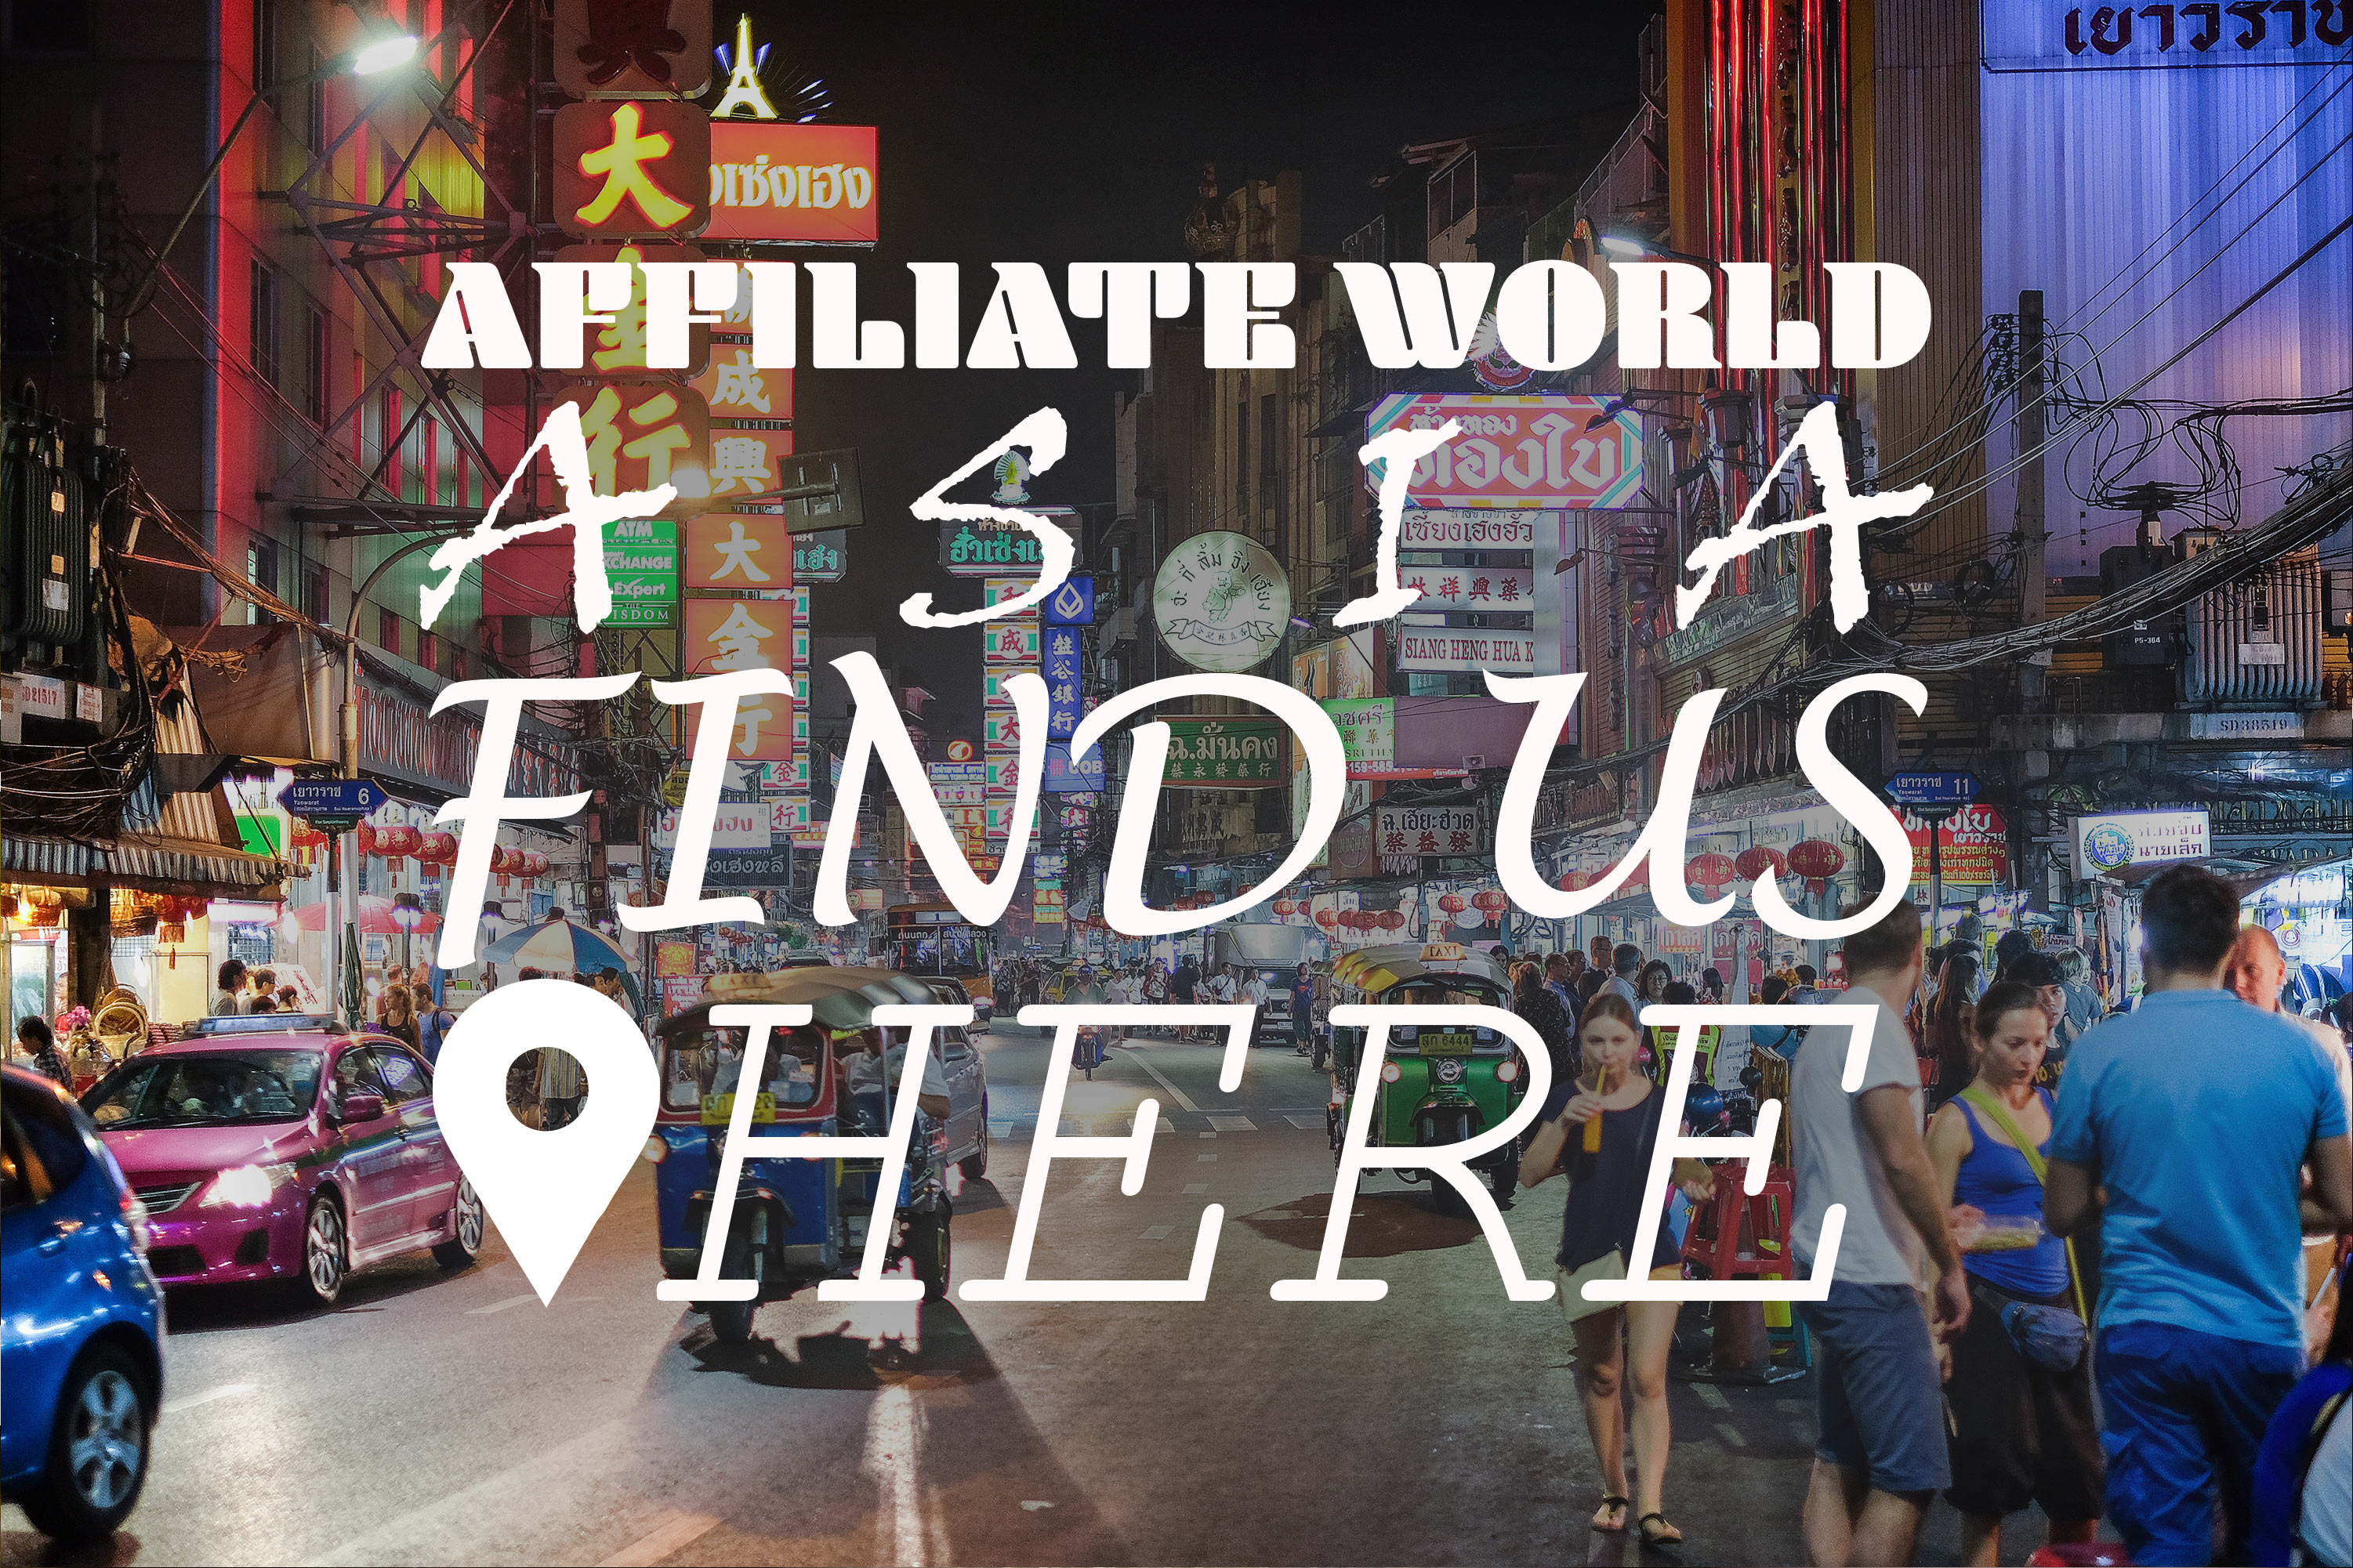 Masters in Cash at Affiliate world Asia